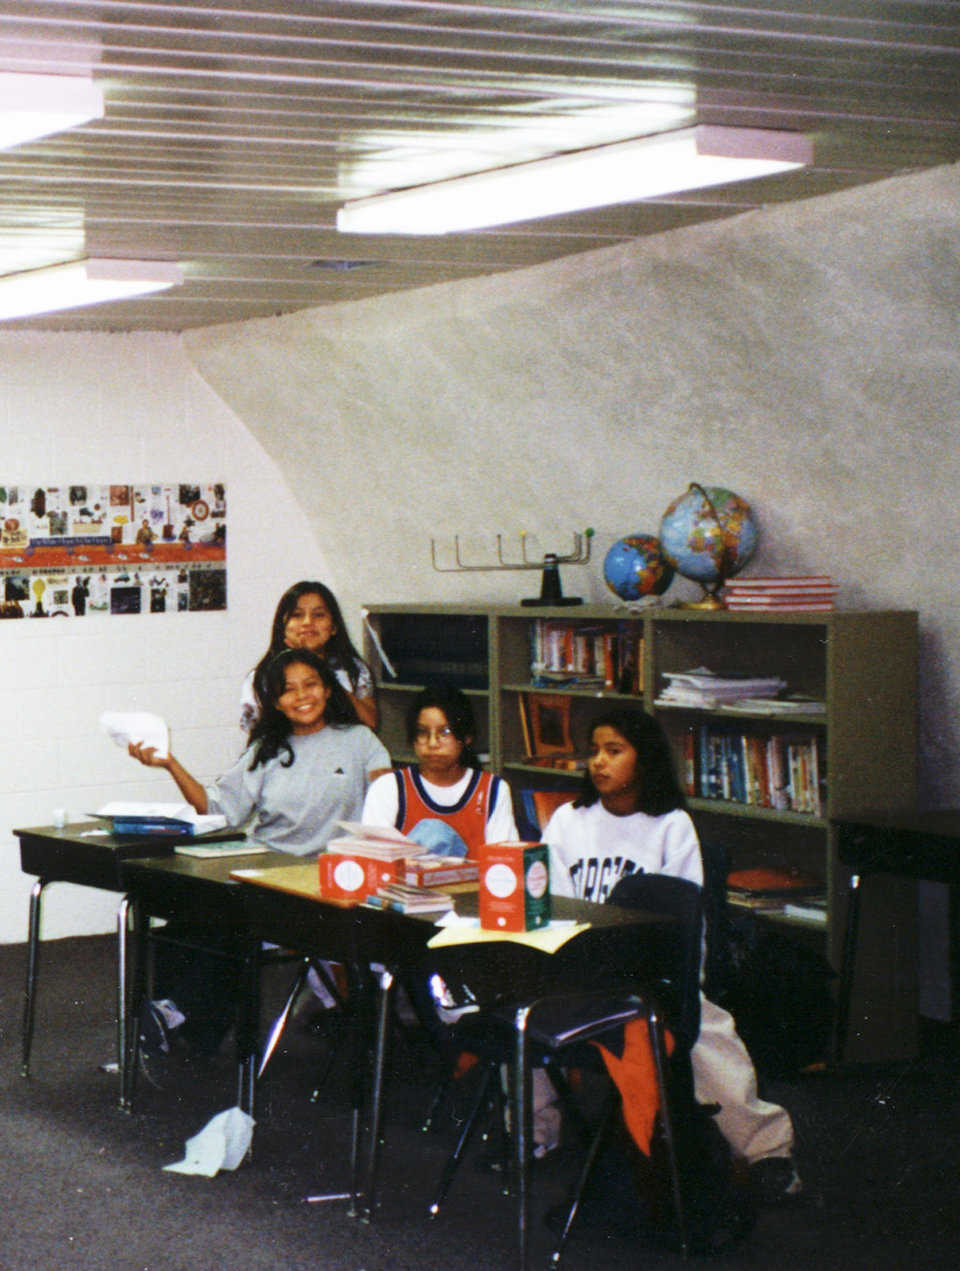 Students enjoy Multipurpose Building — Students and faculty use the Multipurpose Building for a variety of purposes.